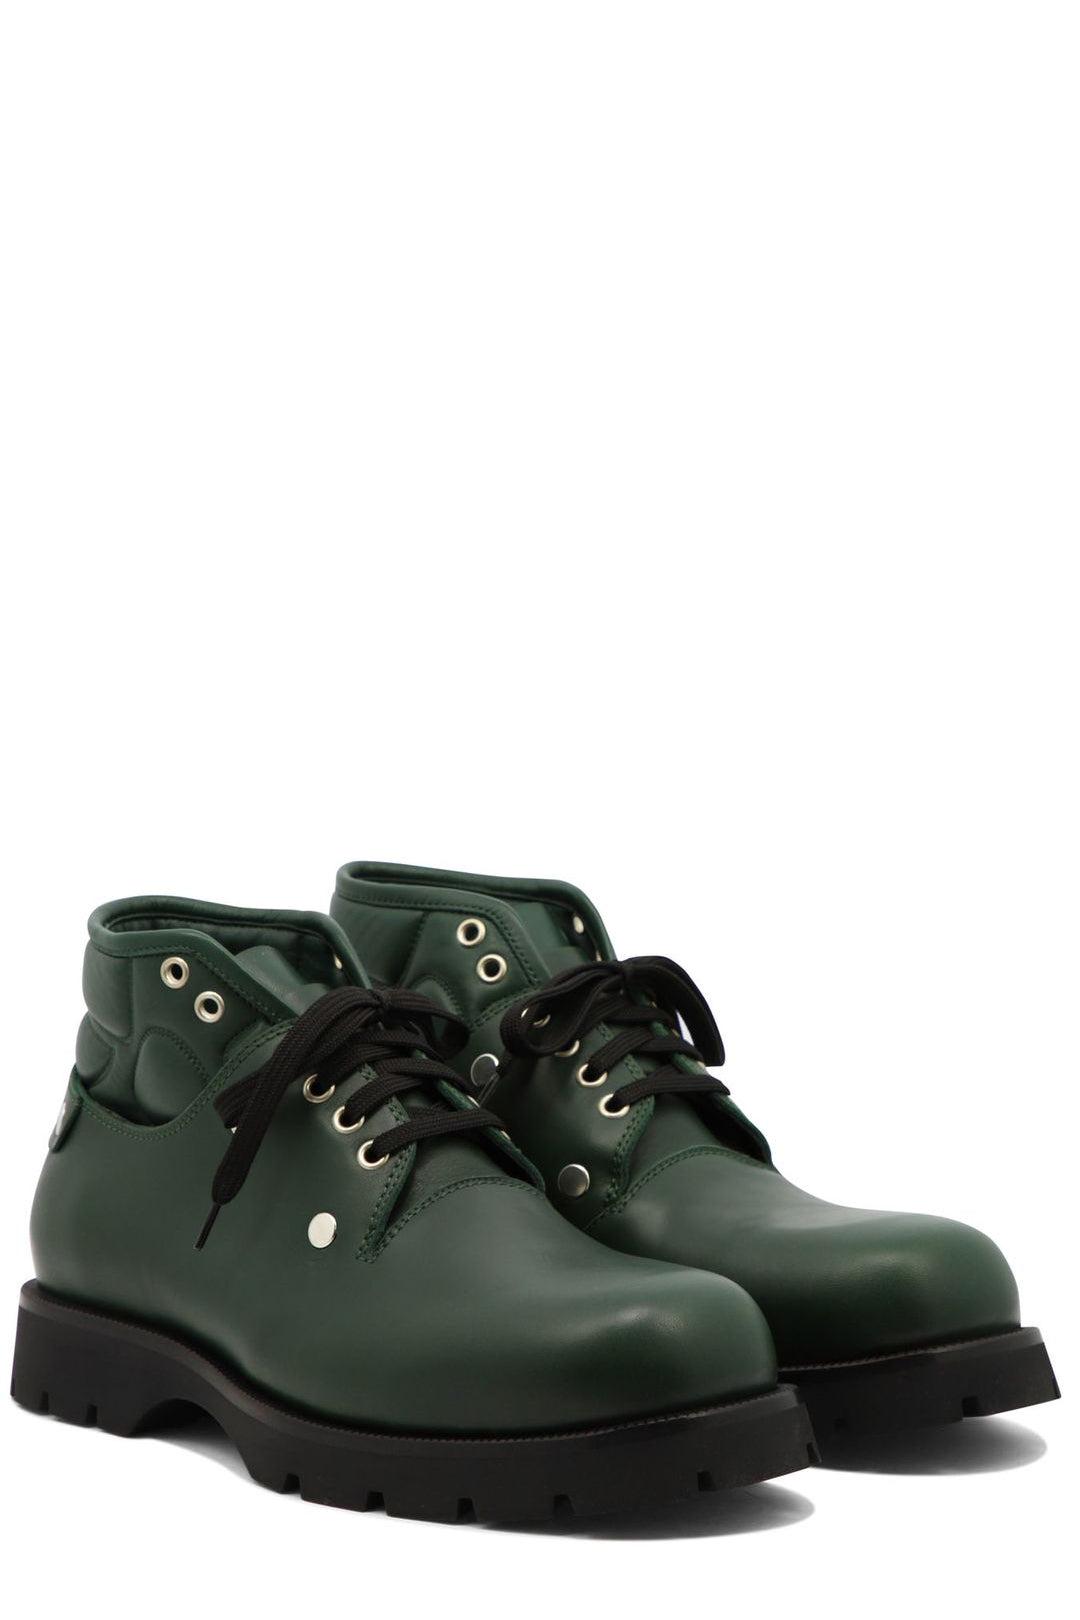 Jil Sander Ankle Lace-up Boots in Green for Men | Lyst